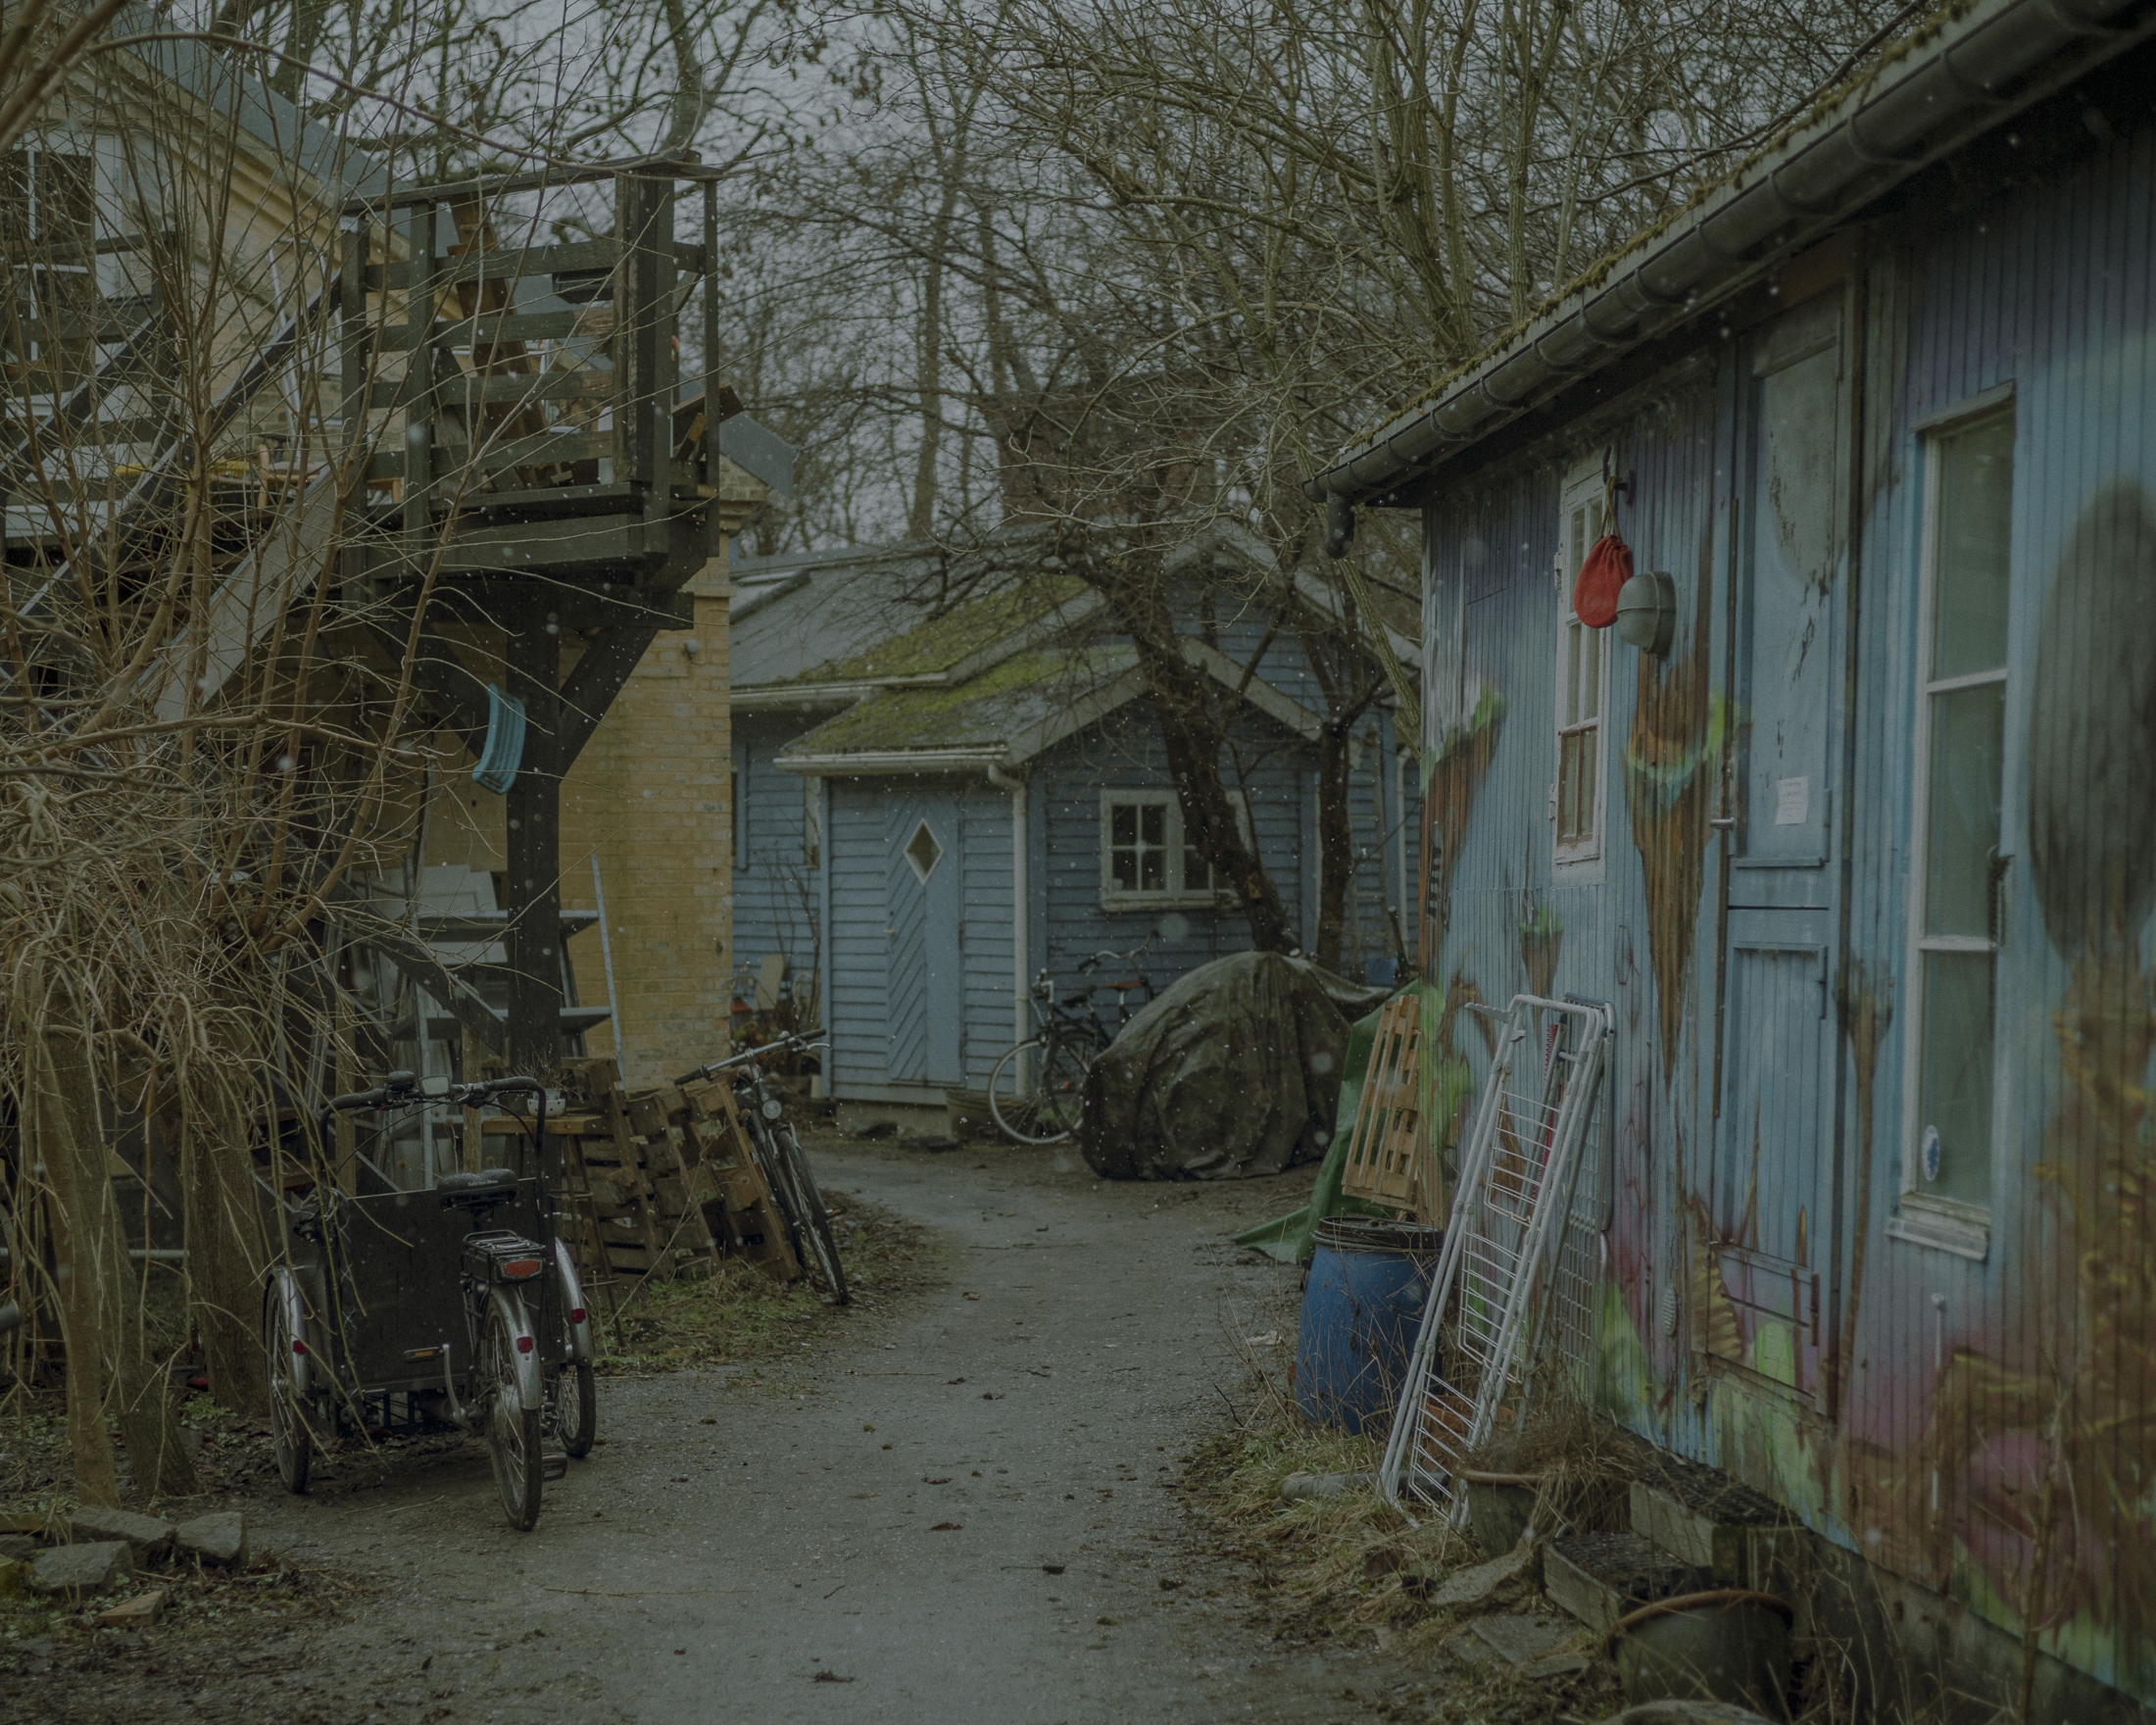 Members of Christiania share small wooden wagons and also sturdy houses built as part of Copenhagen's defence system.